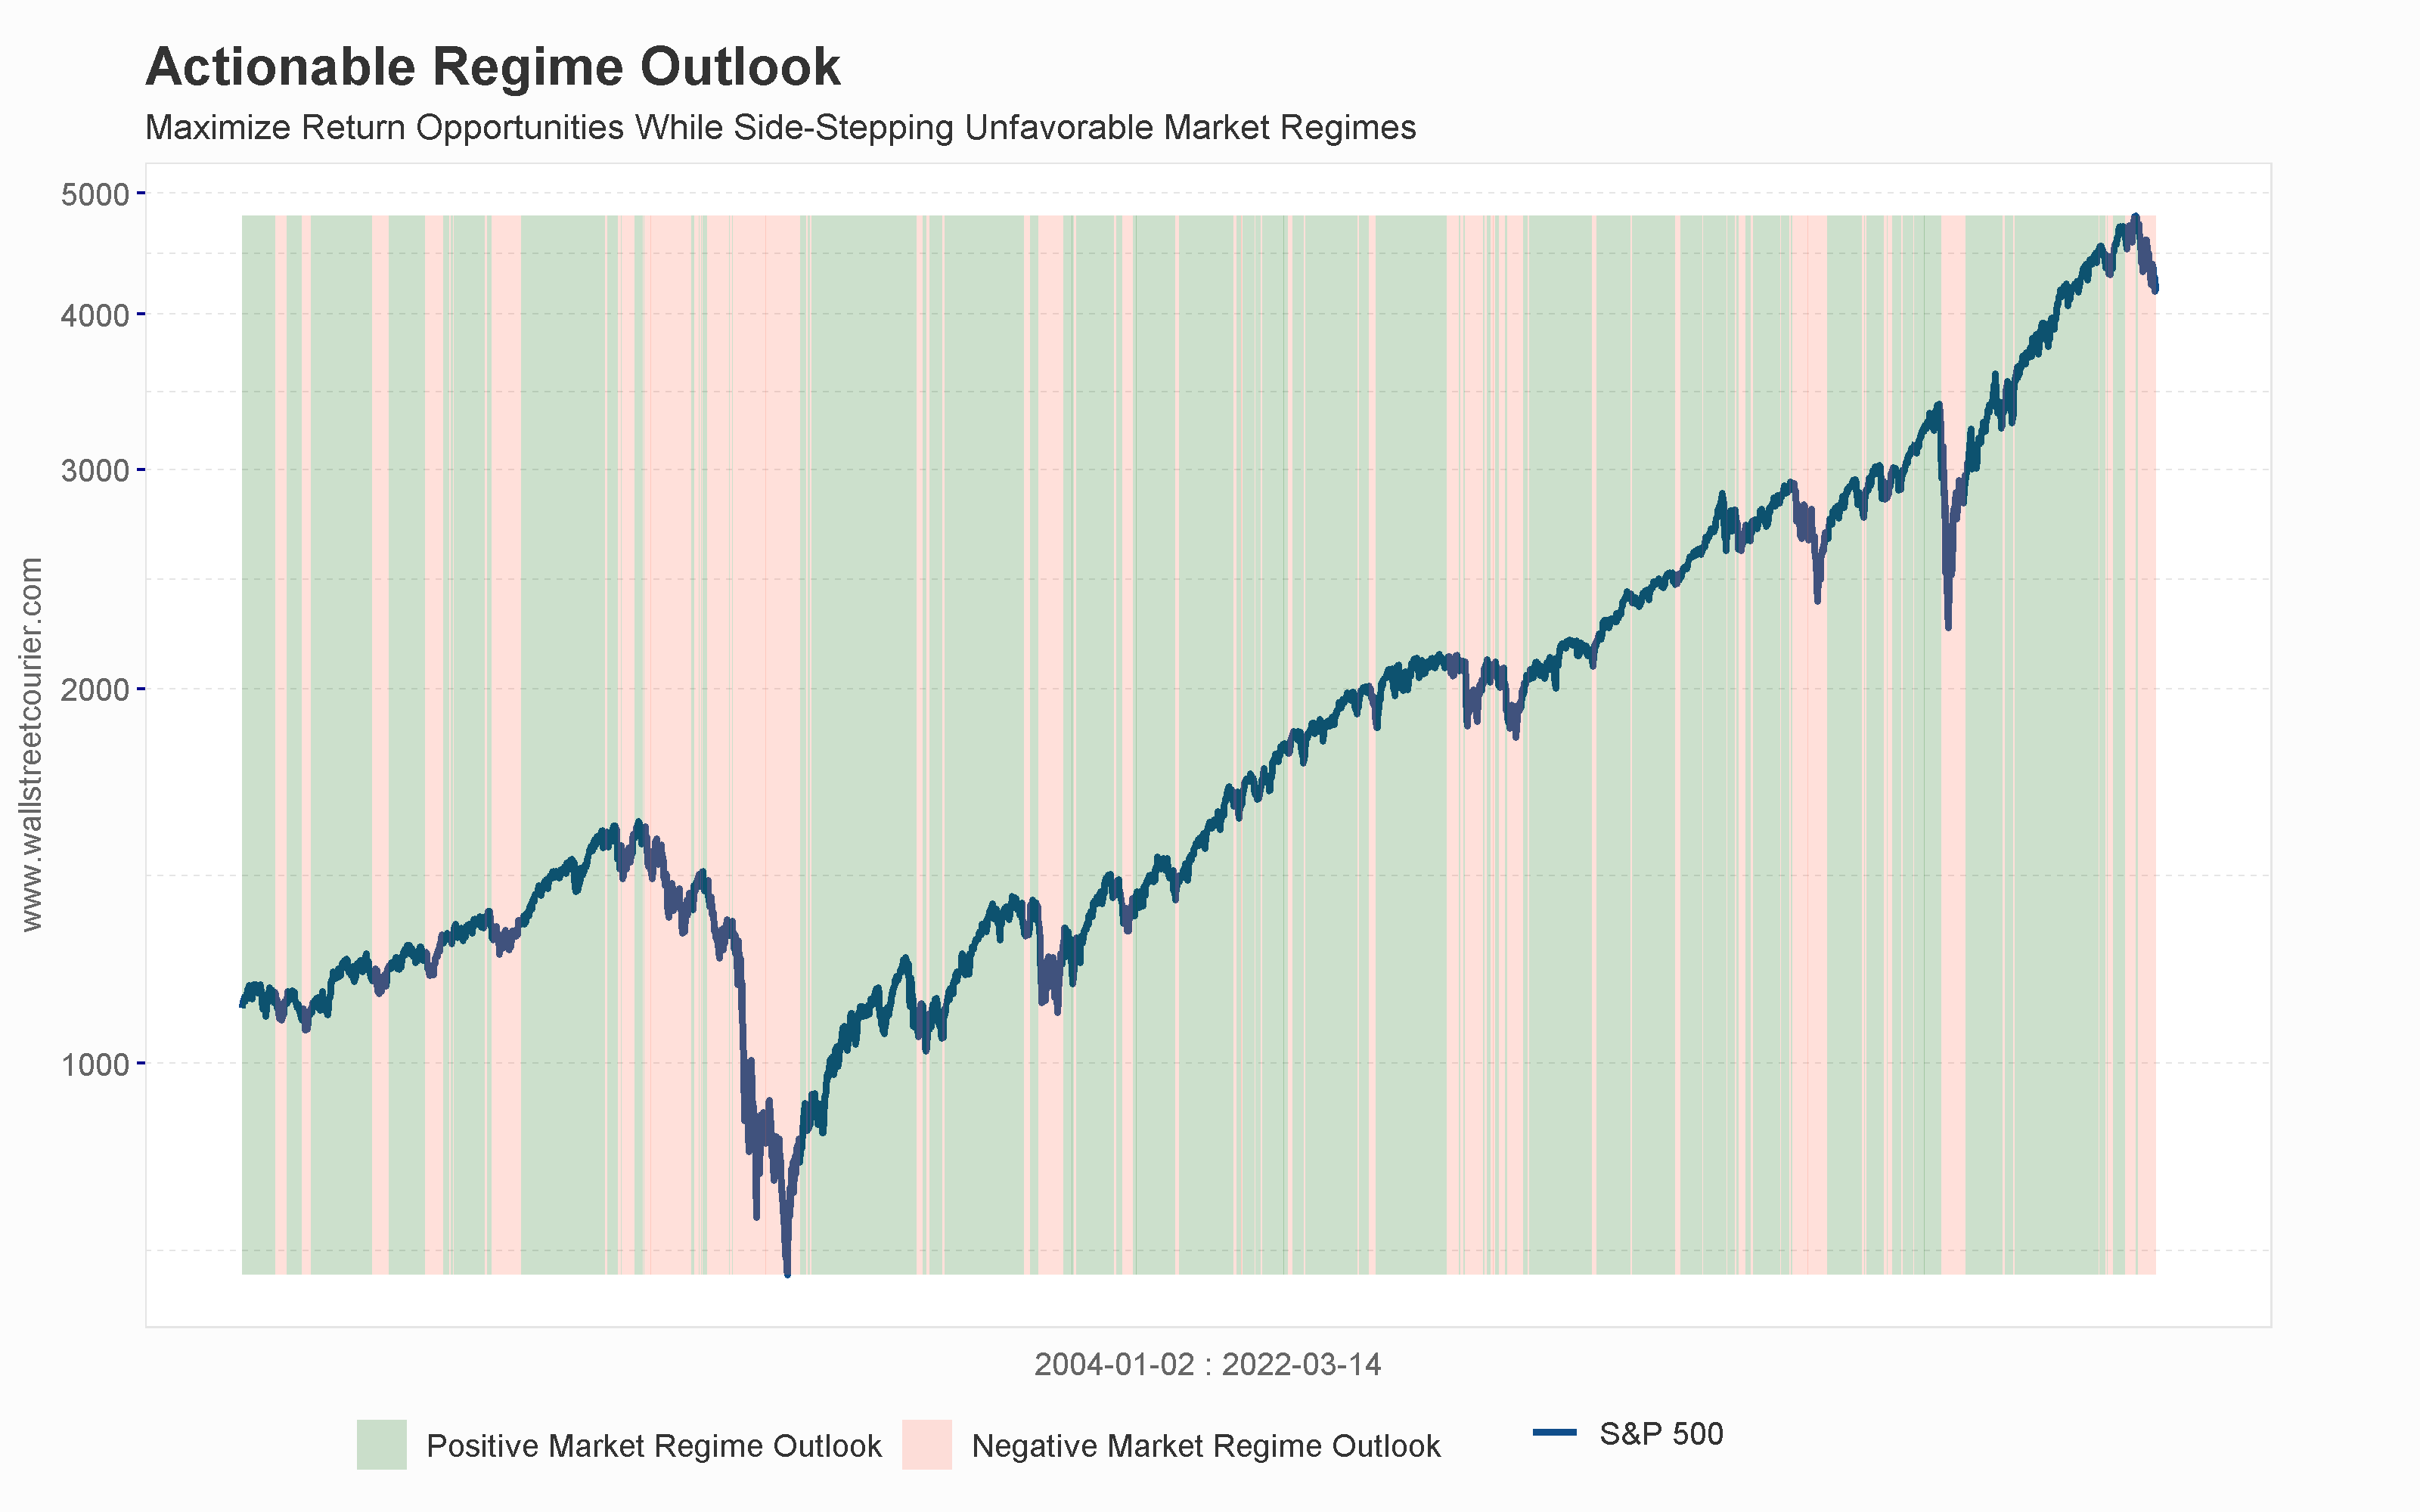 Chart showing identified positive and negative market regimes as color-coded areas on the S&P 500 index, with green indicating positive and red indicating negative. Navigating the Stock Market with WallStreetCourier's in-depth analysis and actionable outlook for low risk and high return investments.